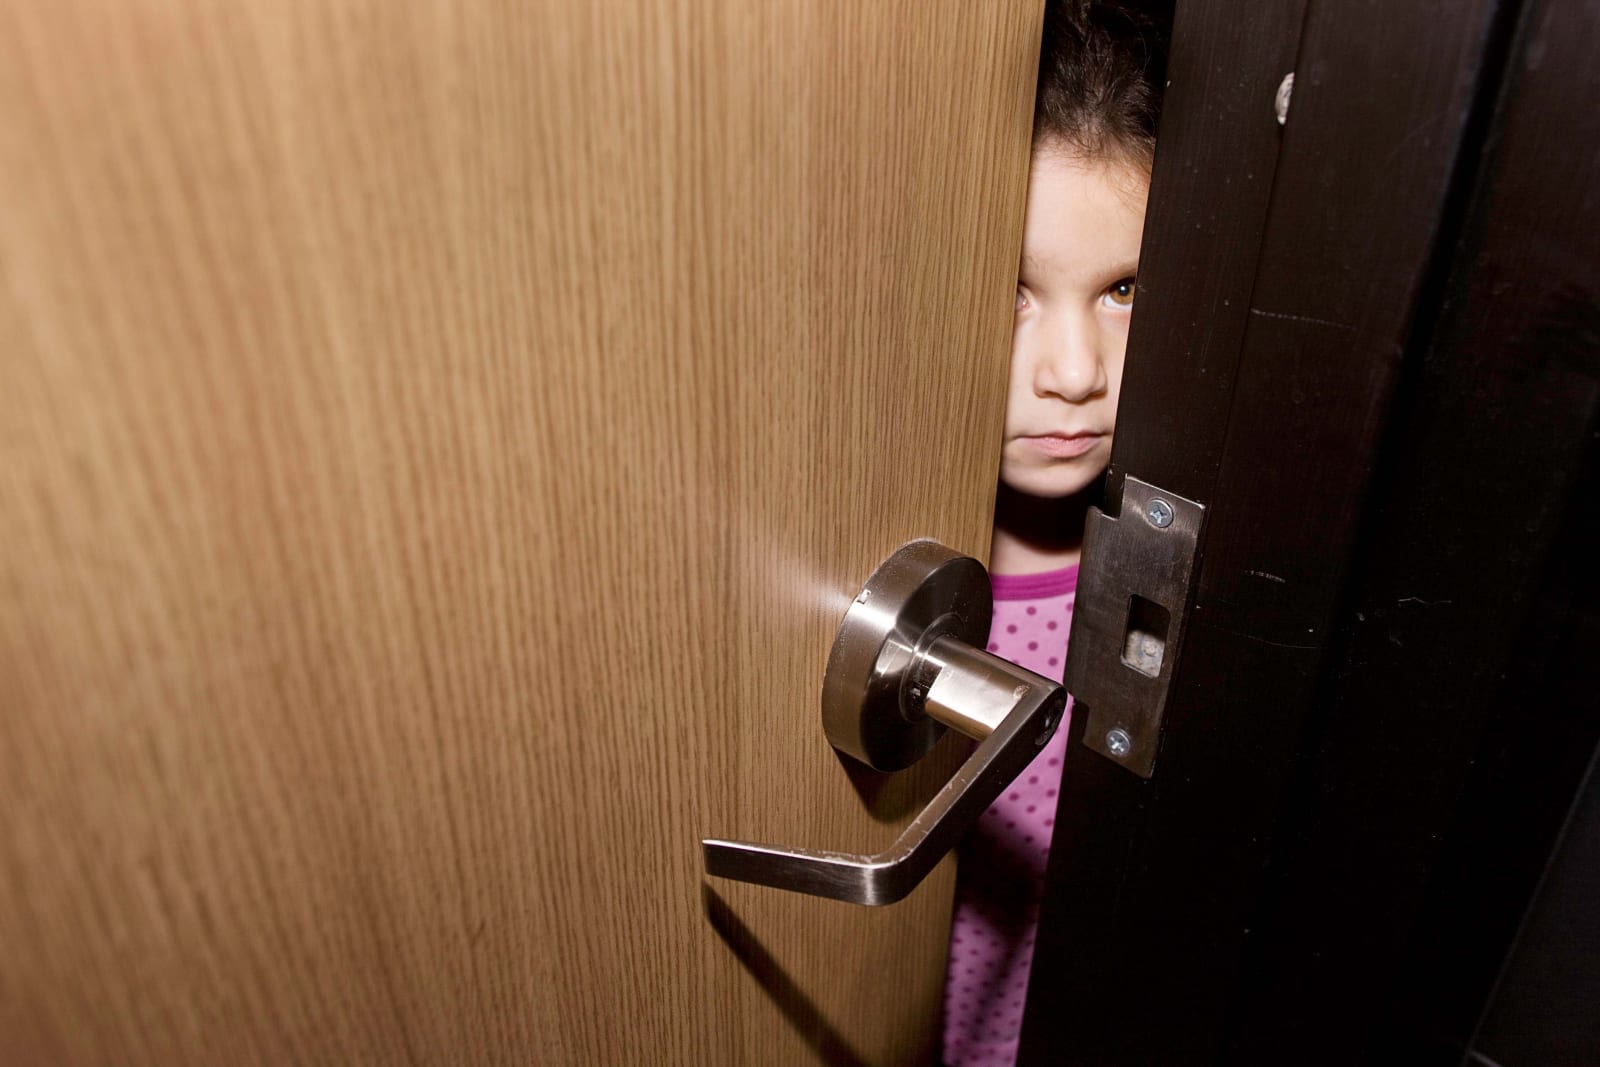 Elinor Carucci photograph of the artist's daughter looking at her from behind a door